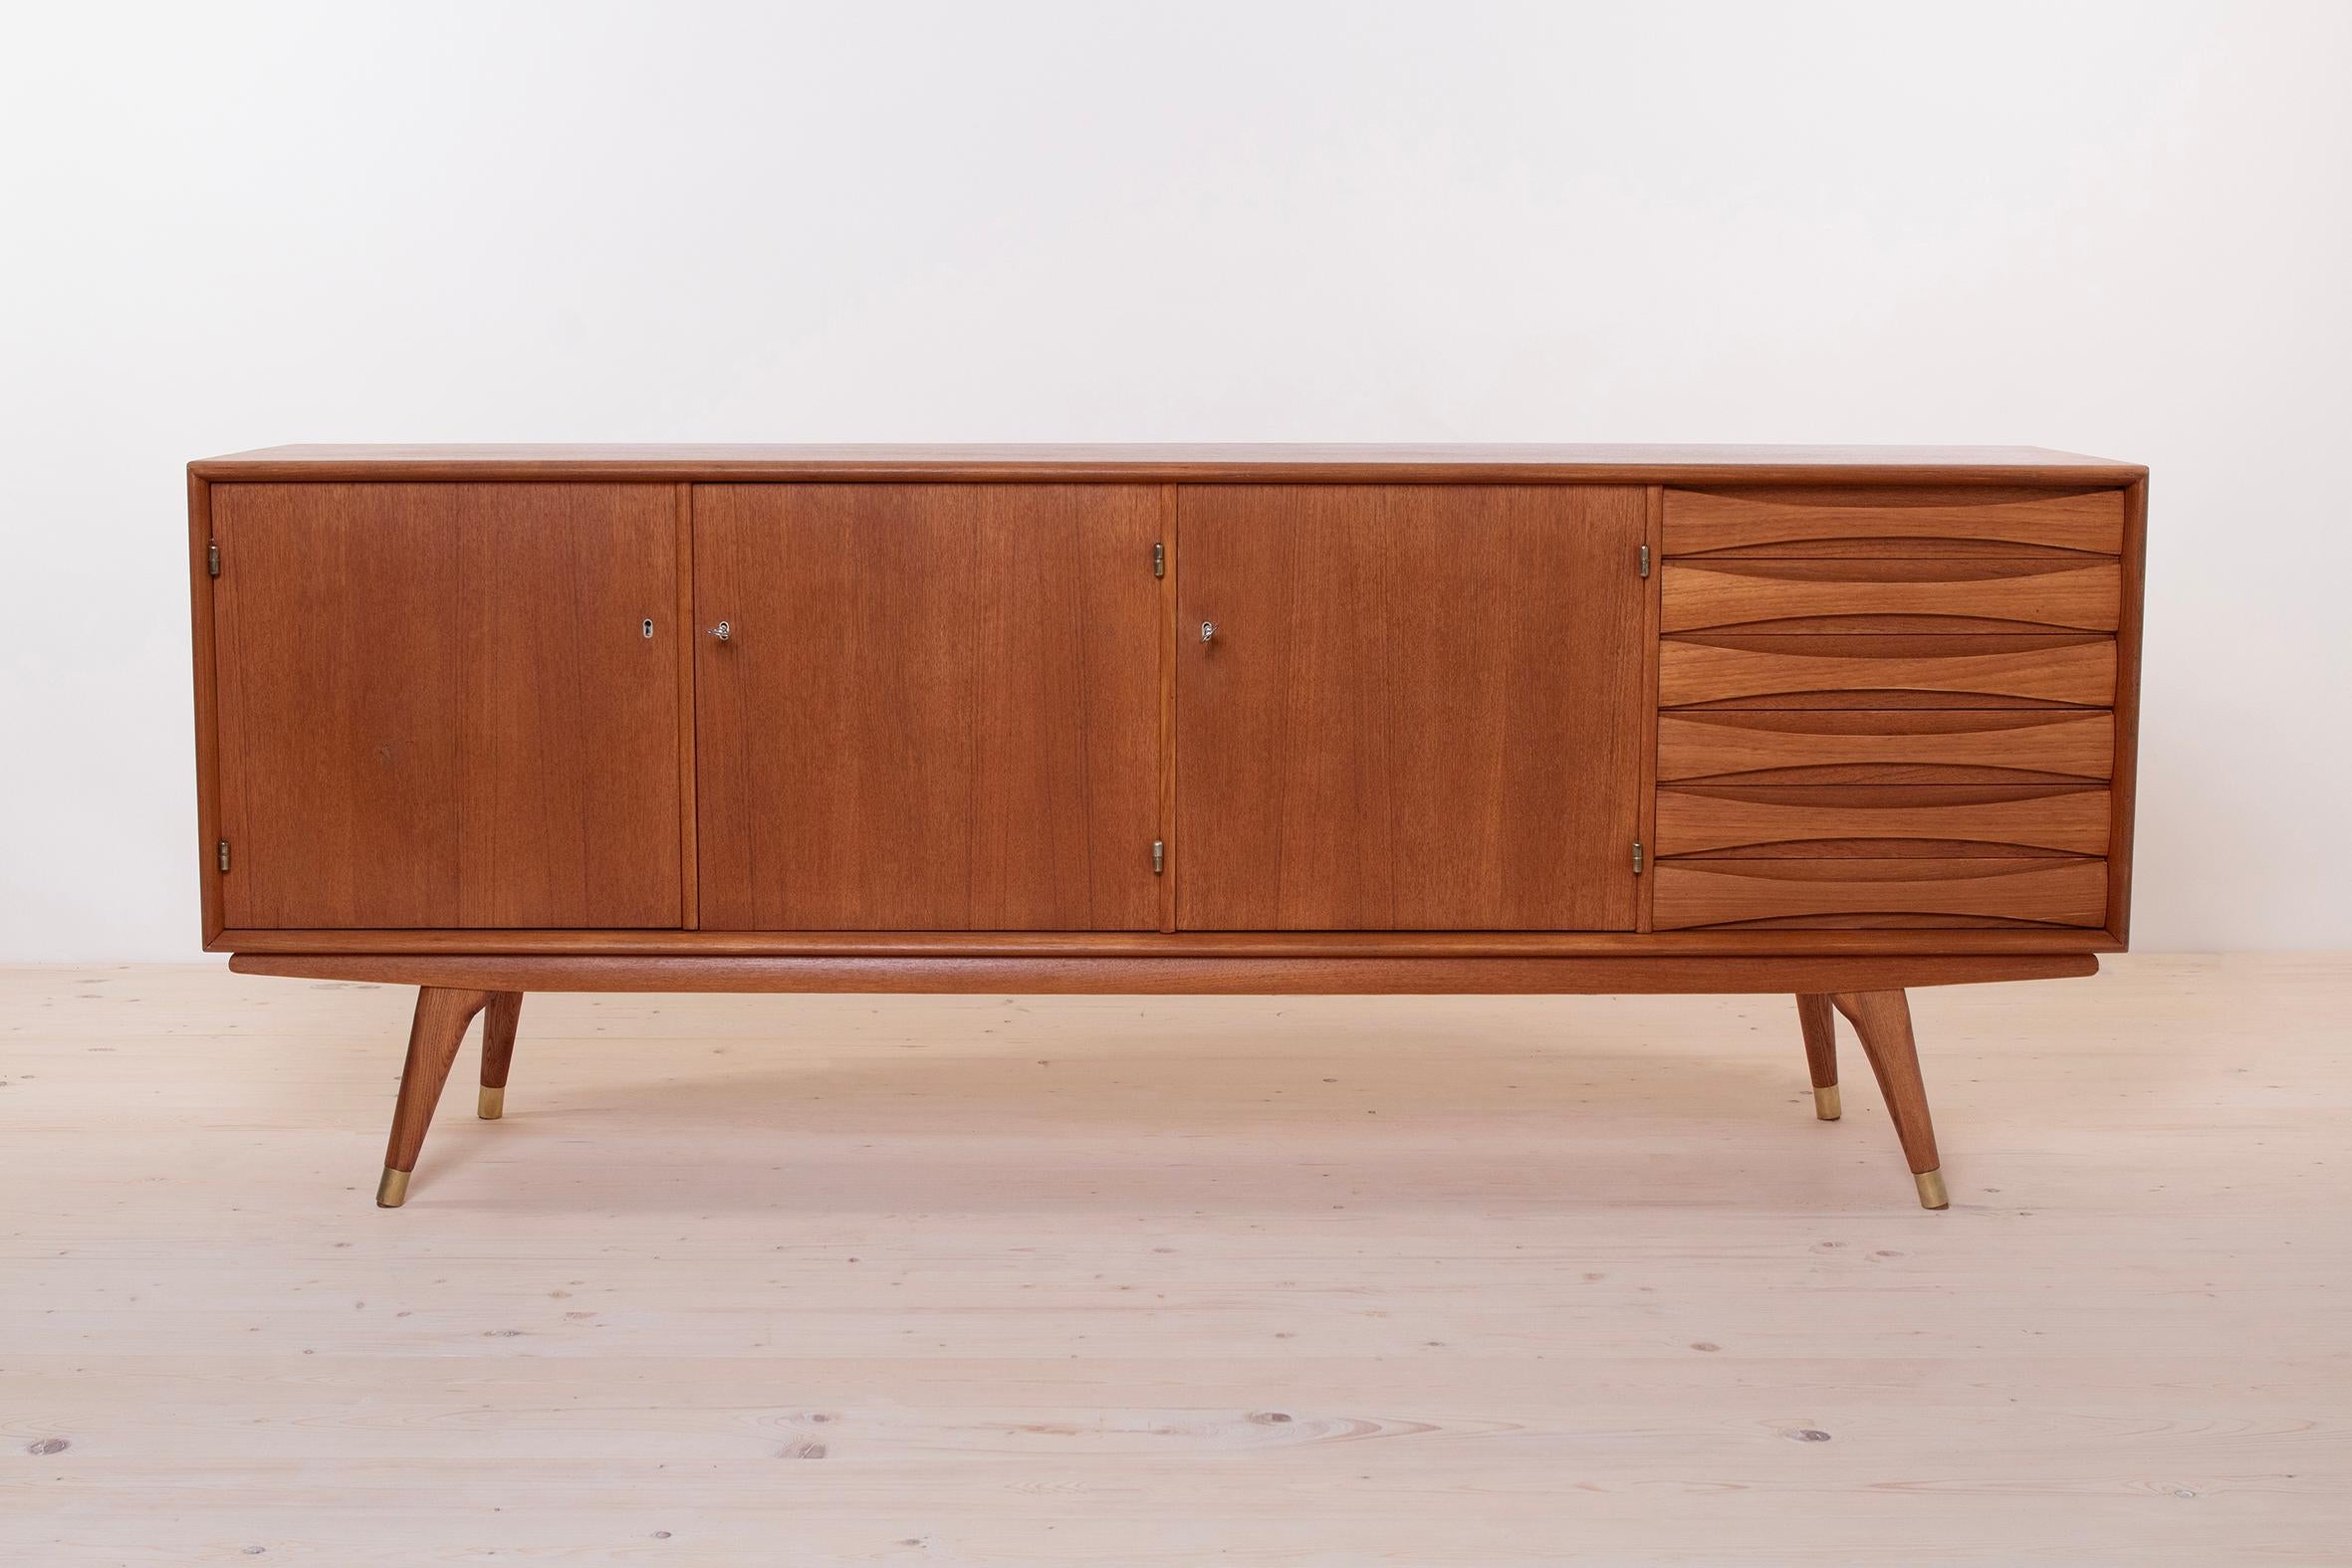 This beautiful teak sideboard was designed by Sven Andersen and manufactured in Norway in second half of the 1950s. The piece features three doors that reveal lots of storage space and six drawers in the section on the right. The sideboard features